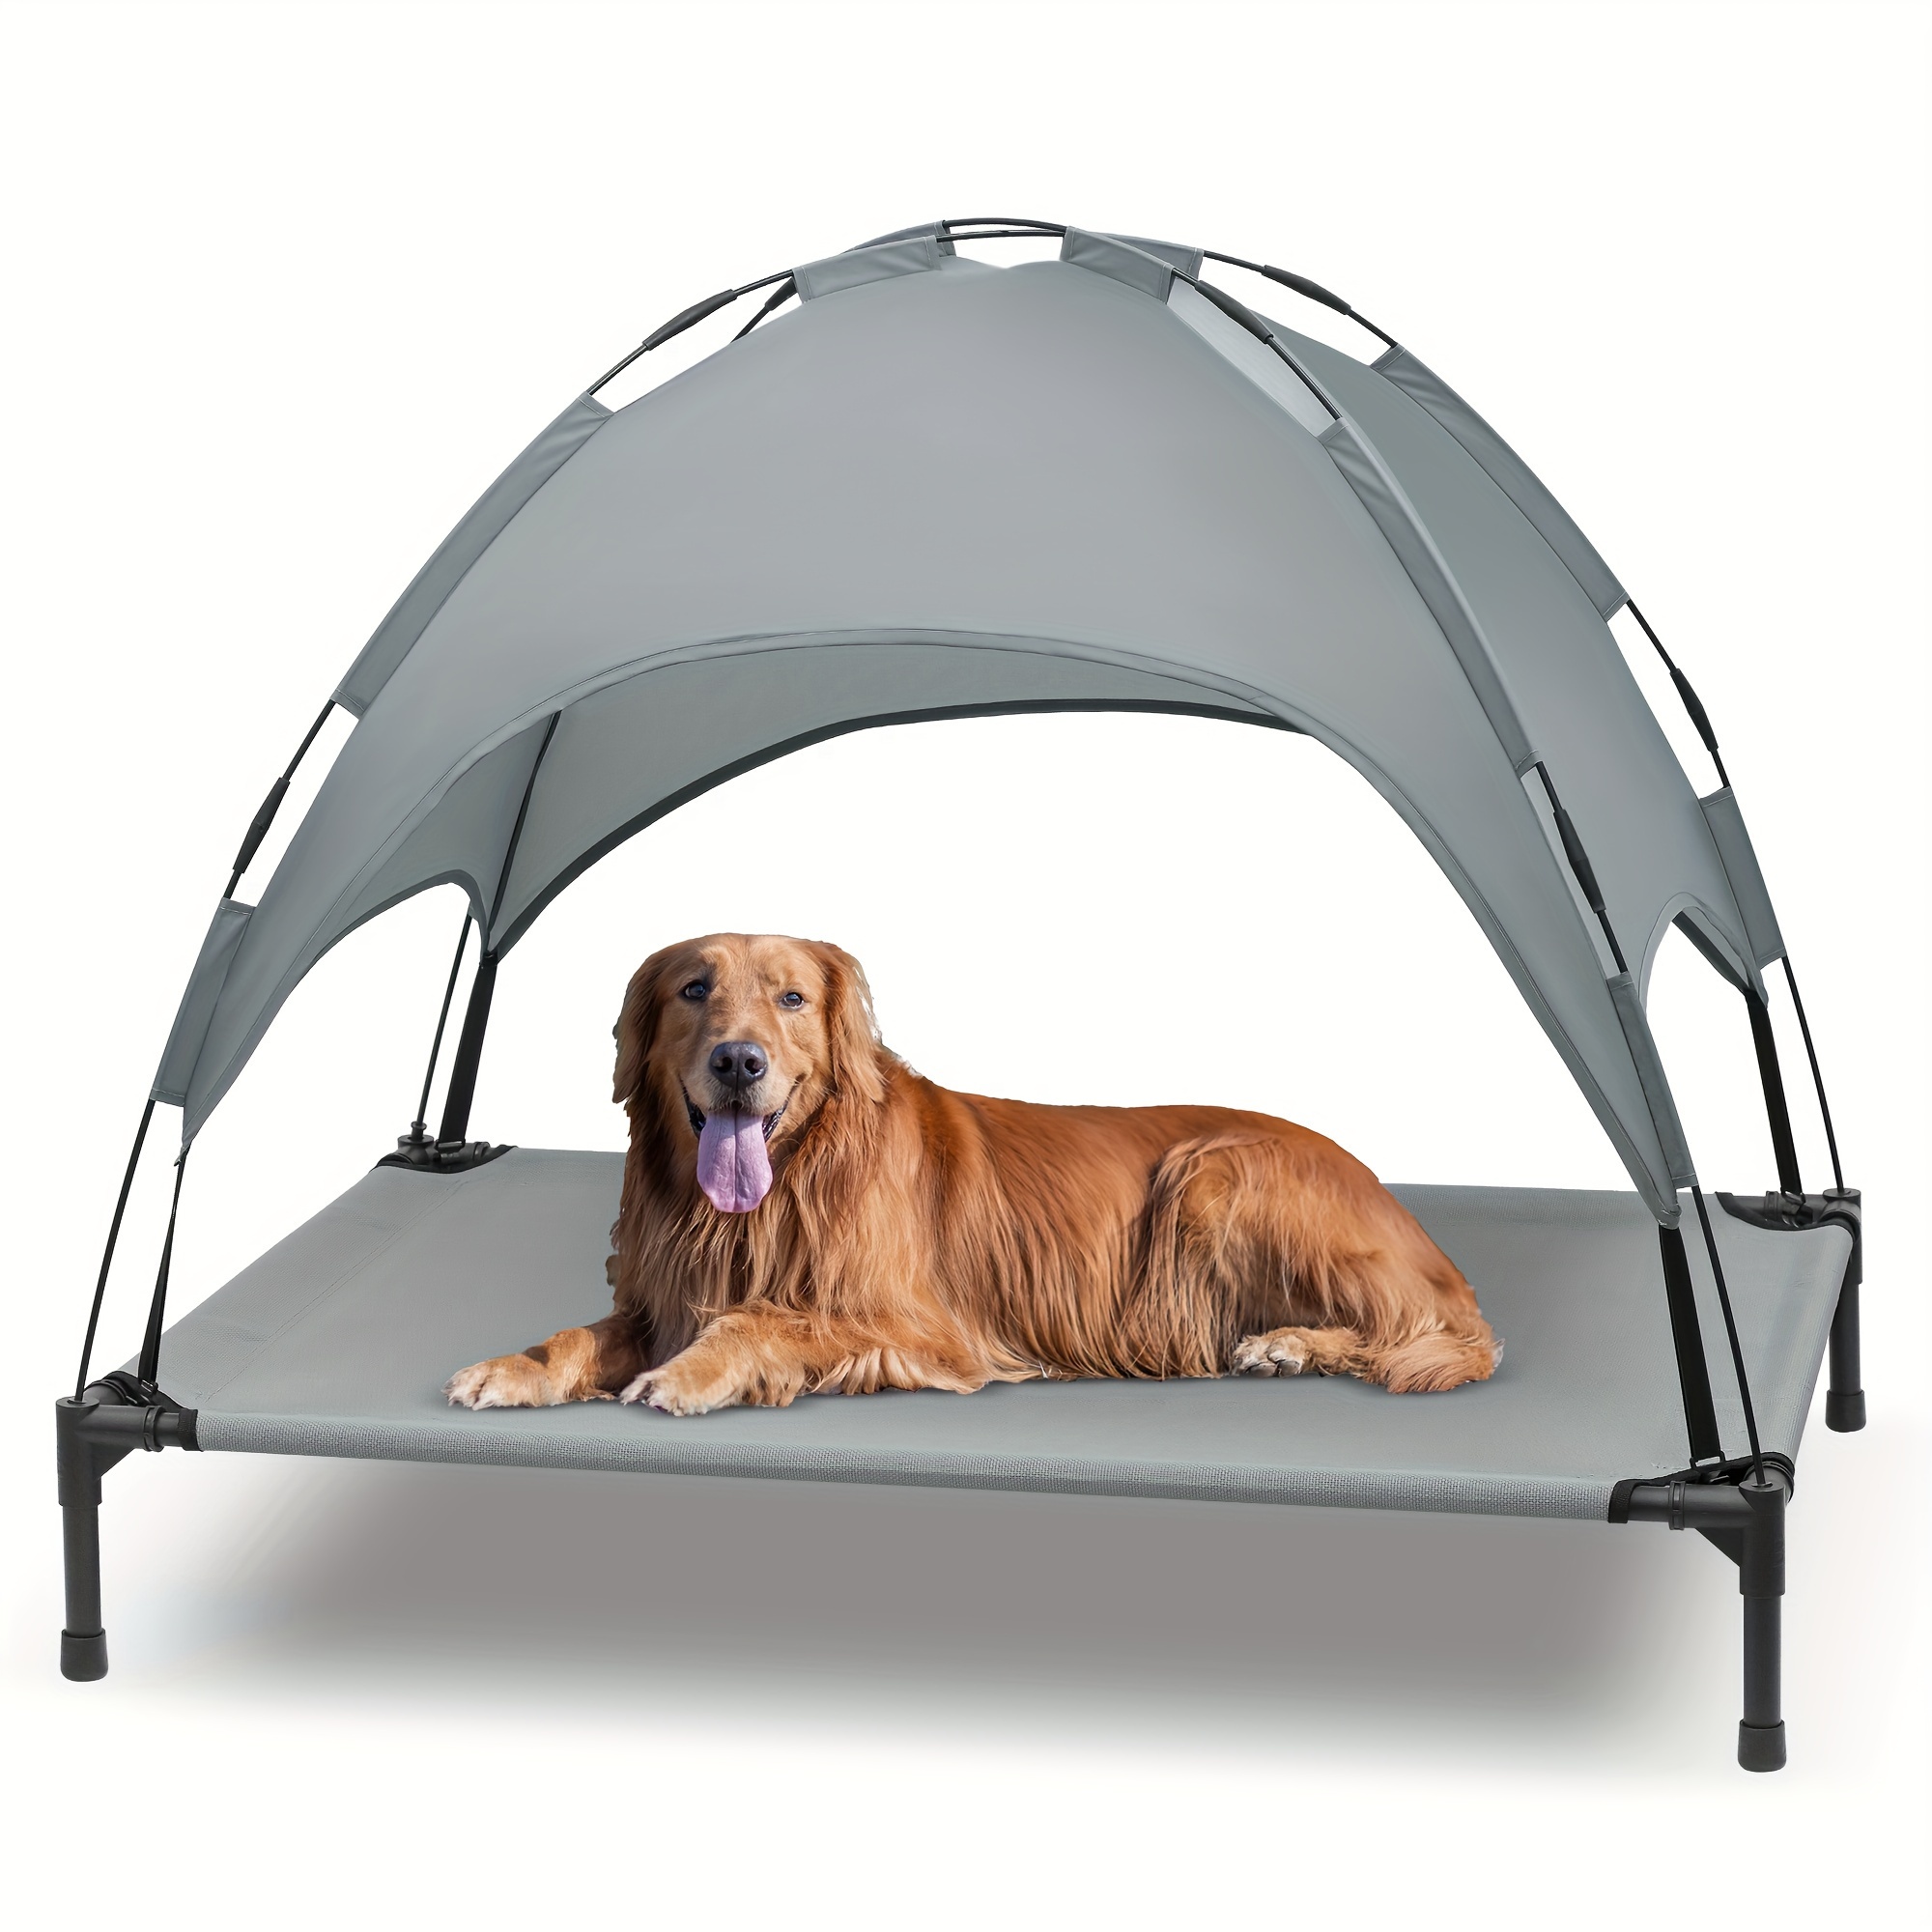 

Niubya Elevated Dog Bed With Canopy, Outdoor Dog Cot With Removable Canopy Shade Tent, Portable Raised Pet Cot Cooling Bed For Dogs And Cats